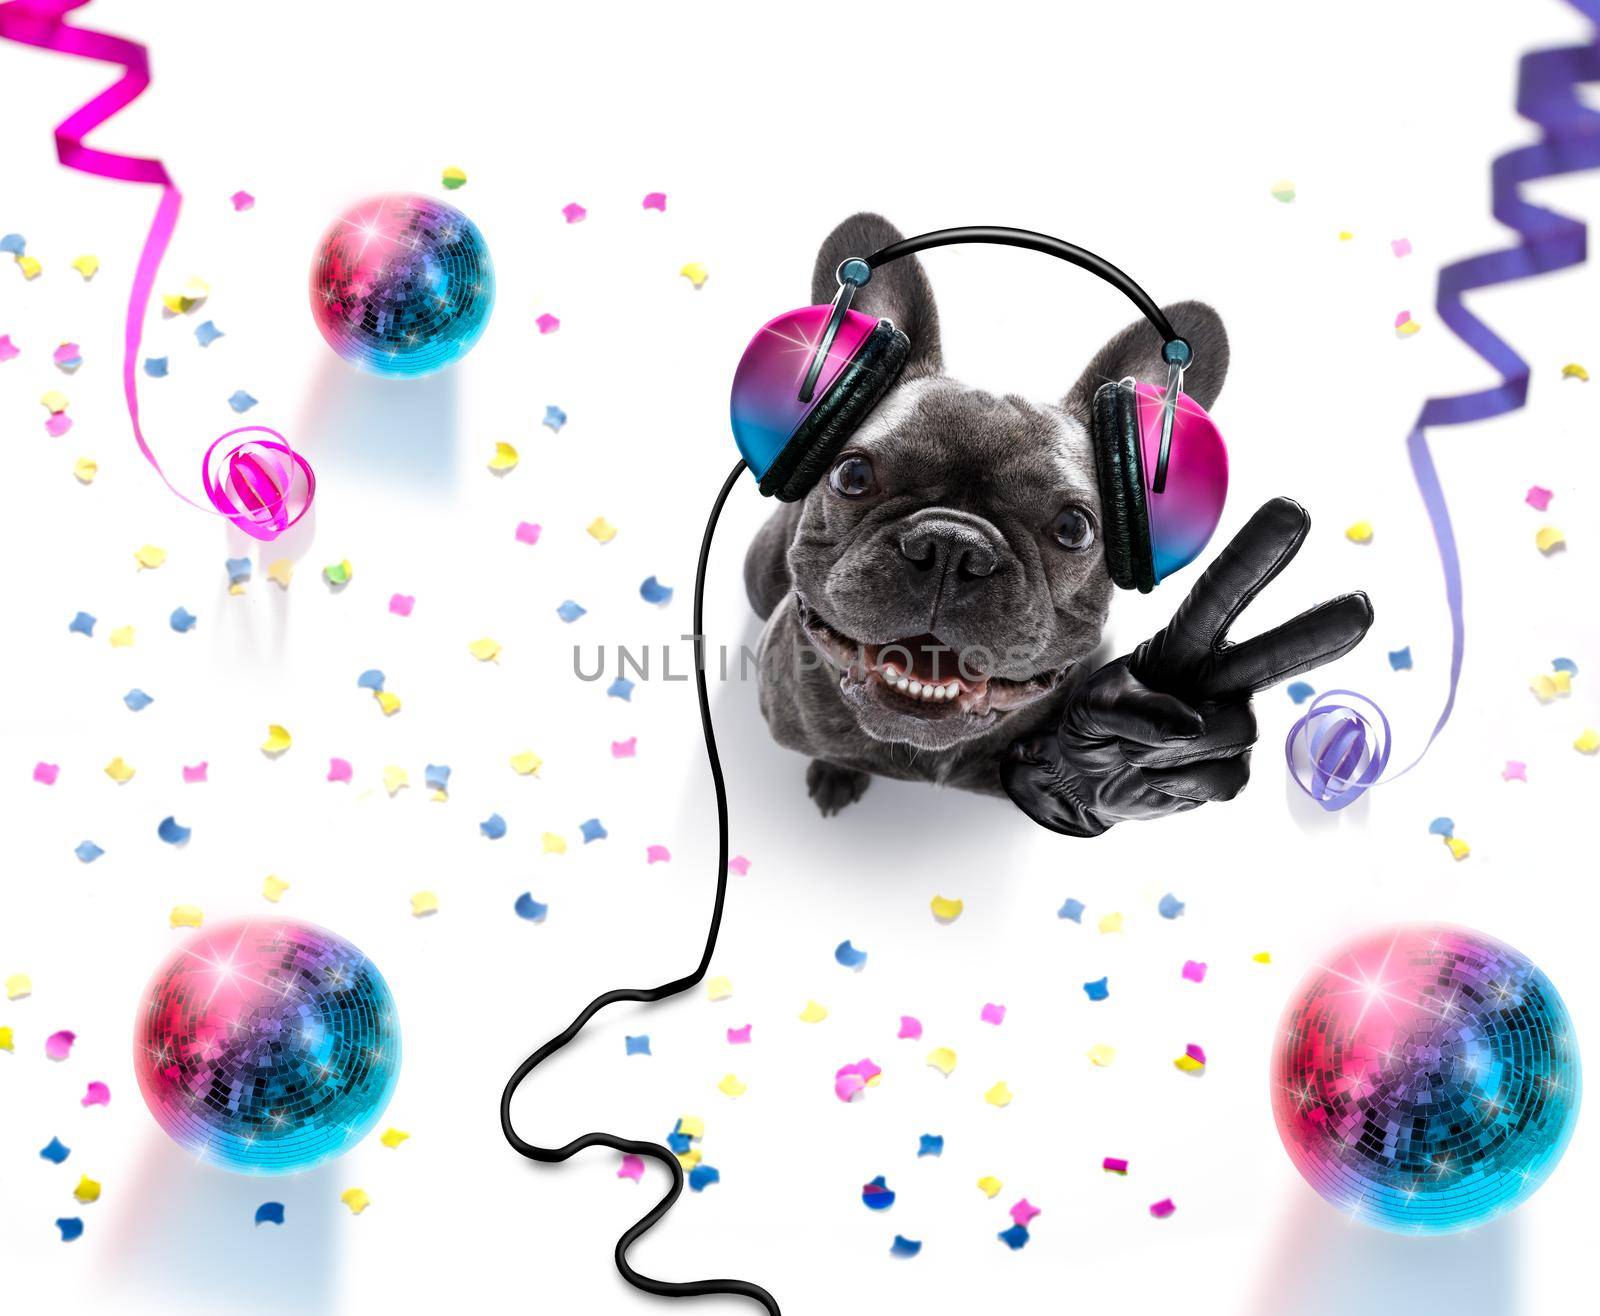 french bulldog  dog playing music in a club with disco ball , isolated on white background, with vinyl record